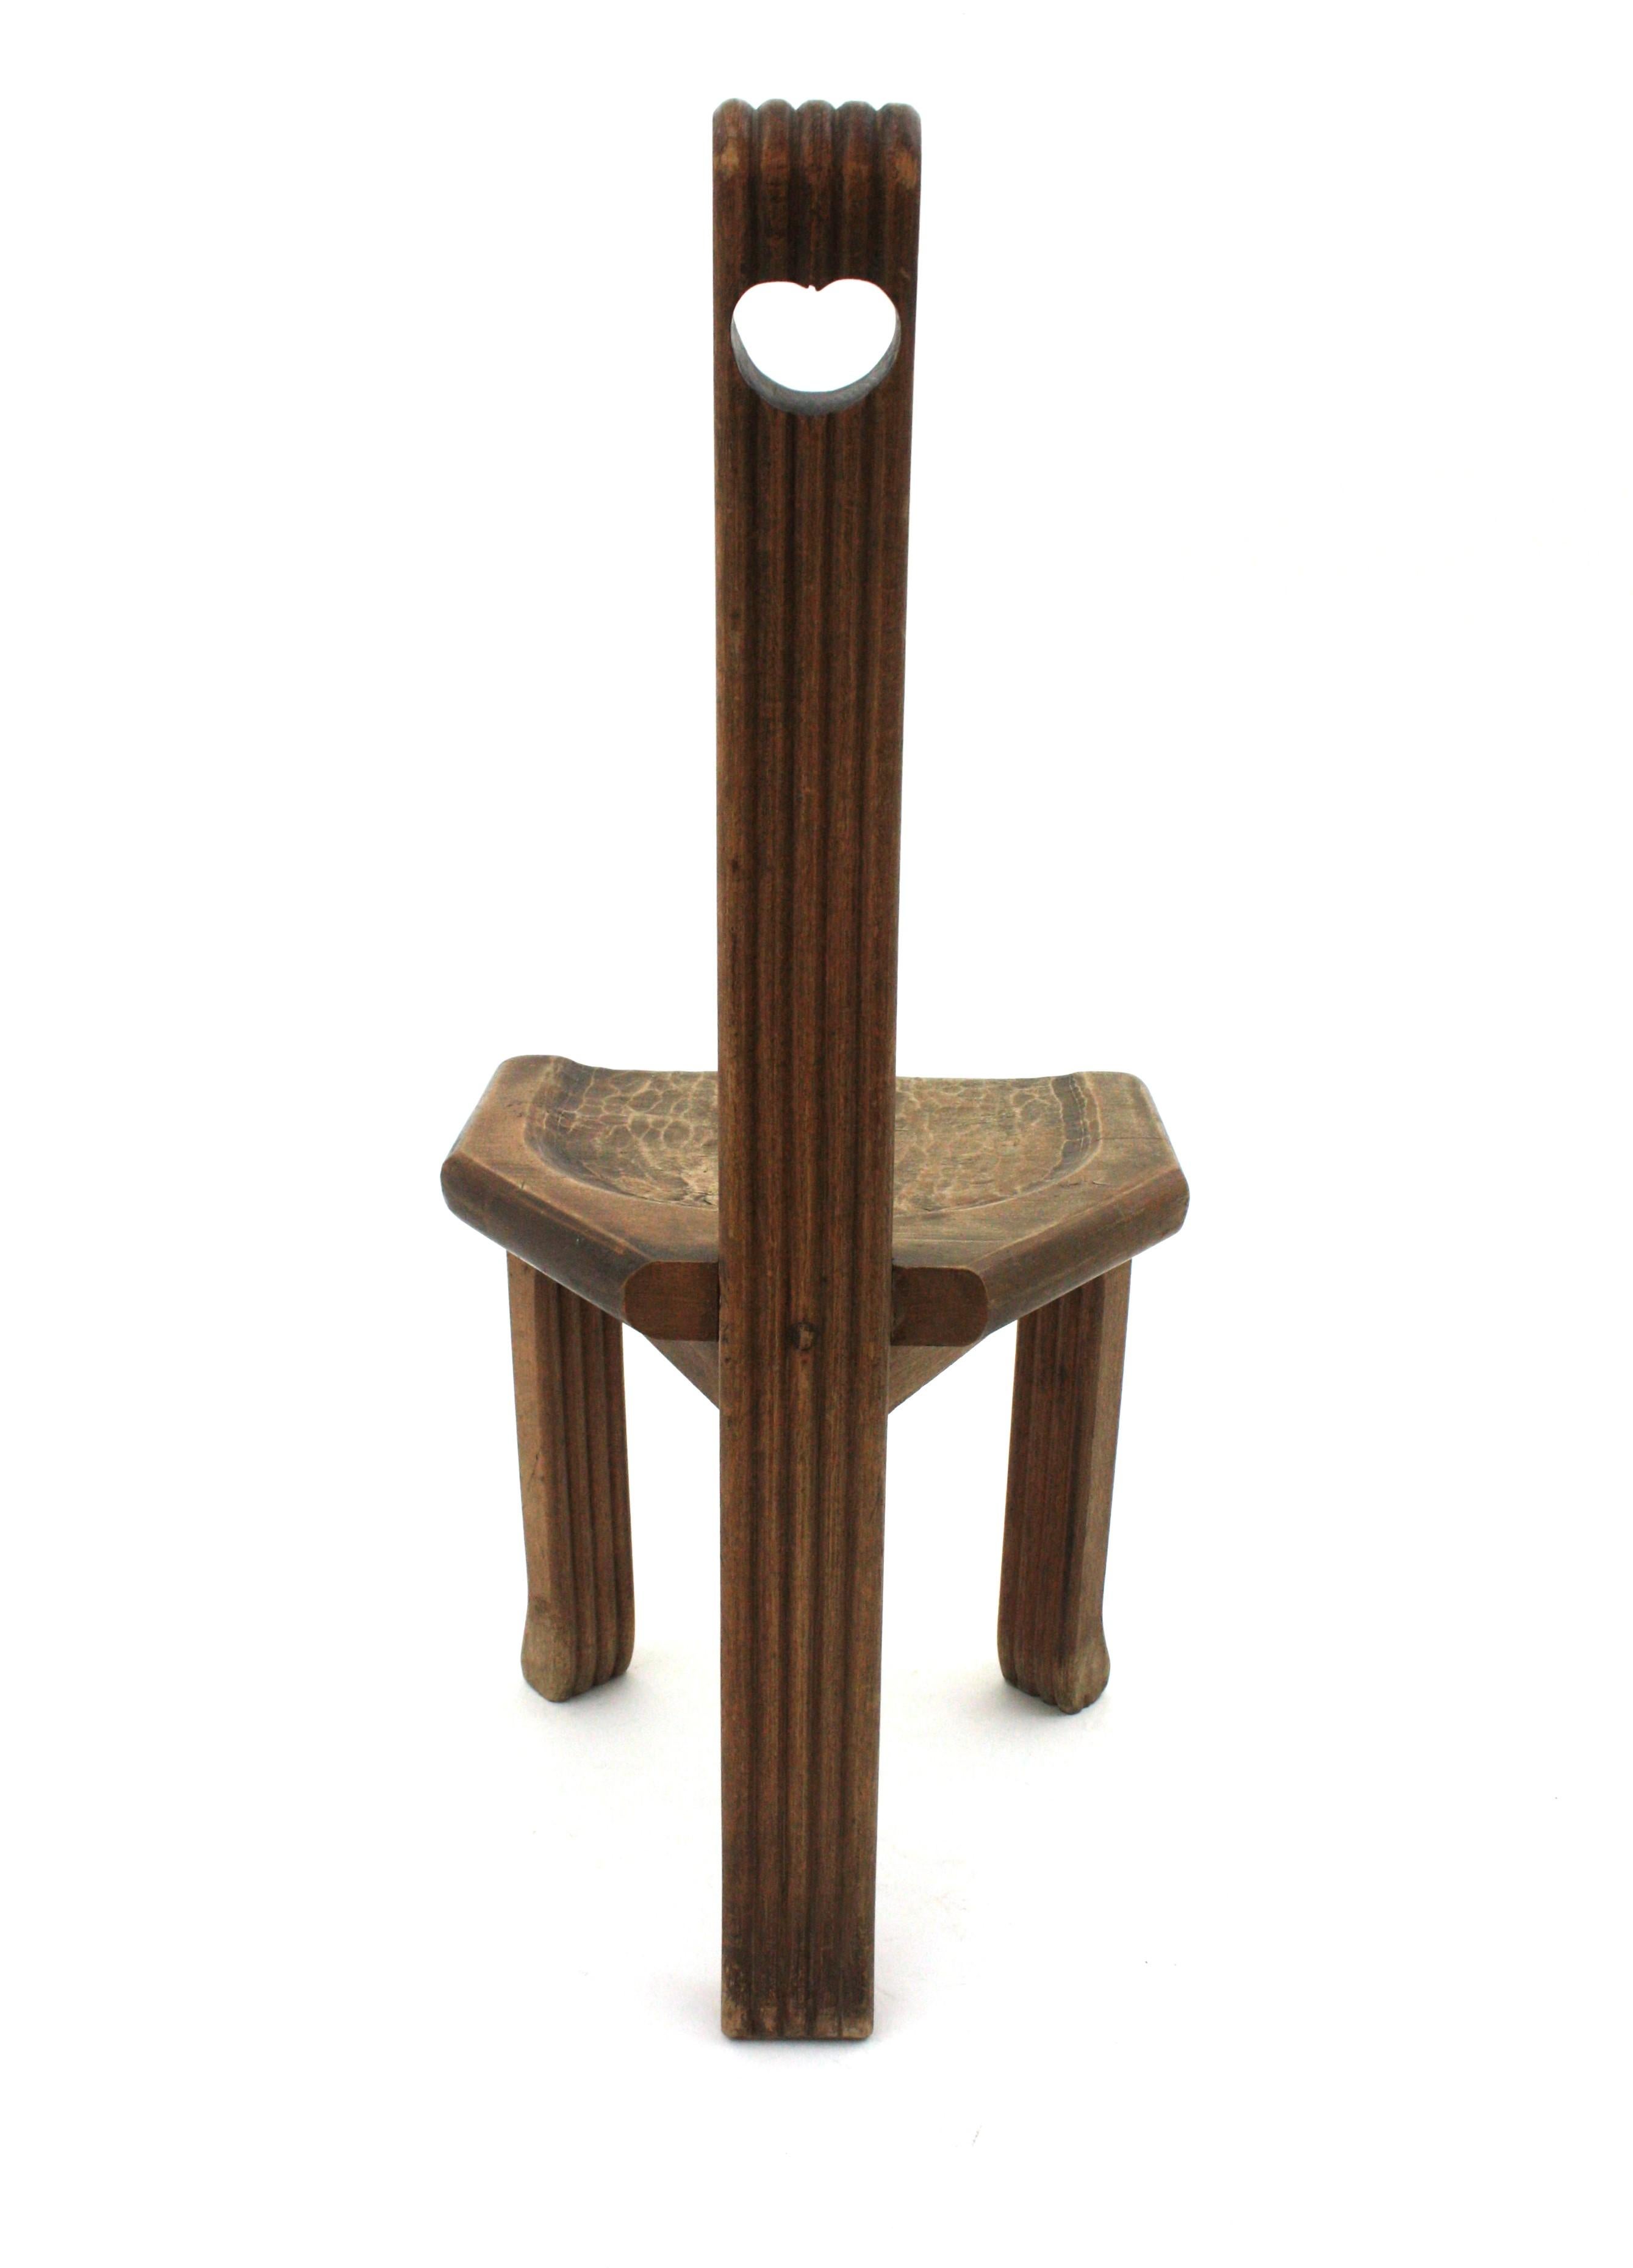 French Brutalist Wood Side Table Tripod Stool with High Backrest, 1950s For Sale 10